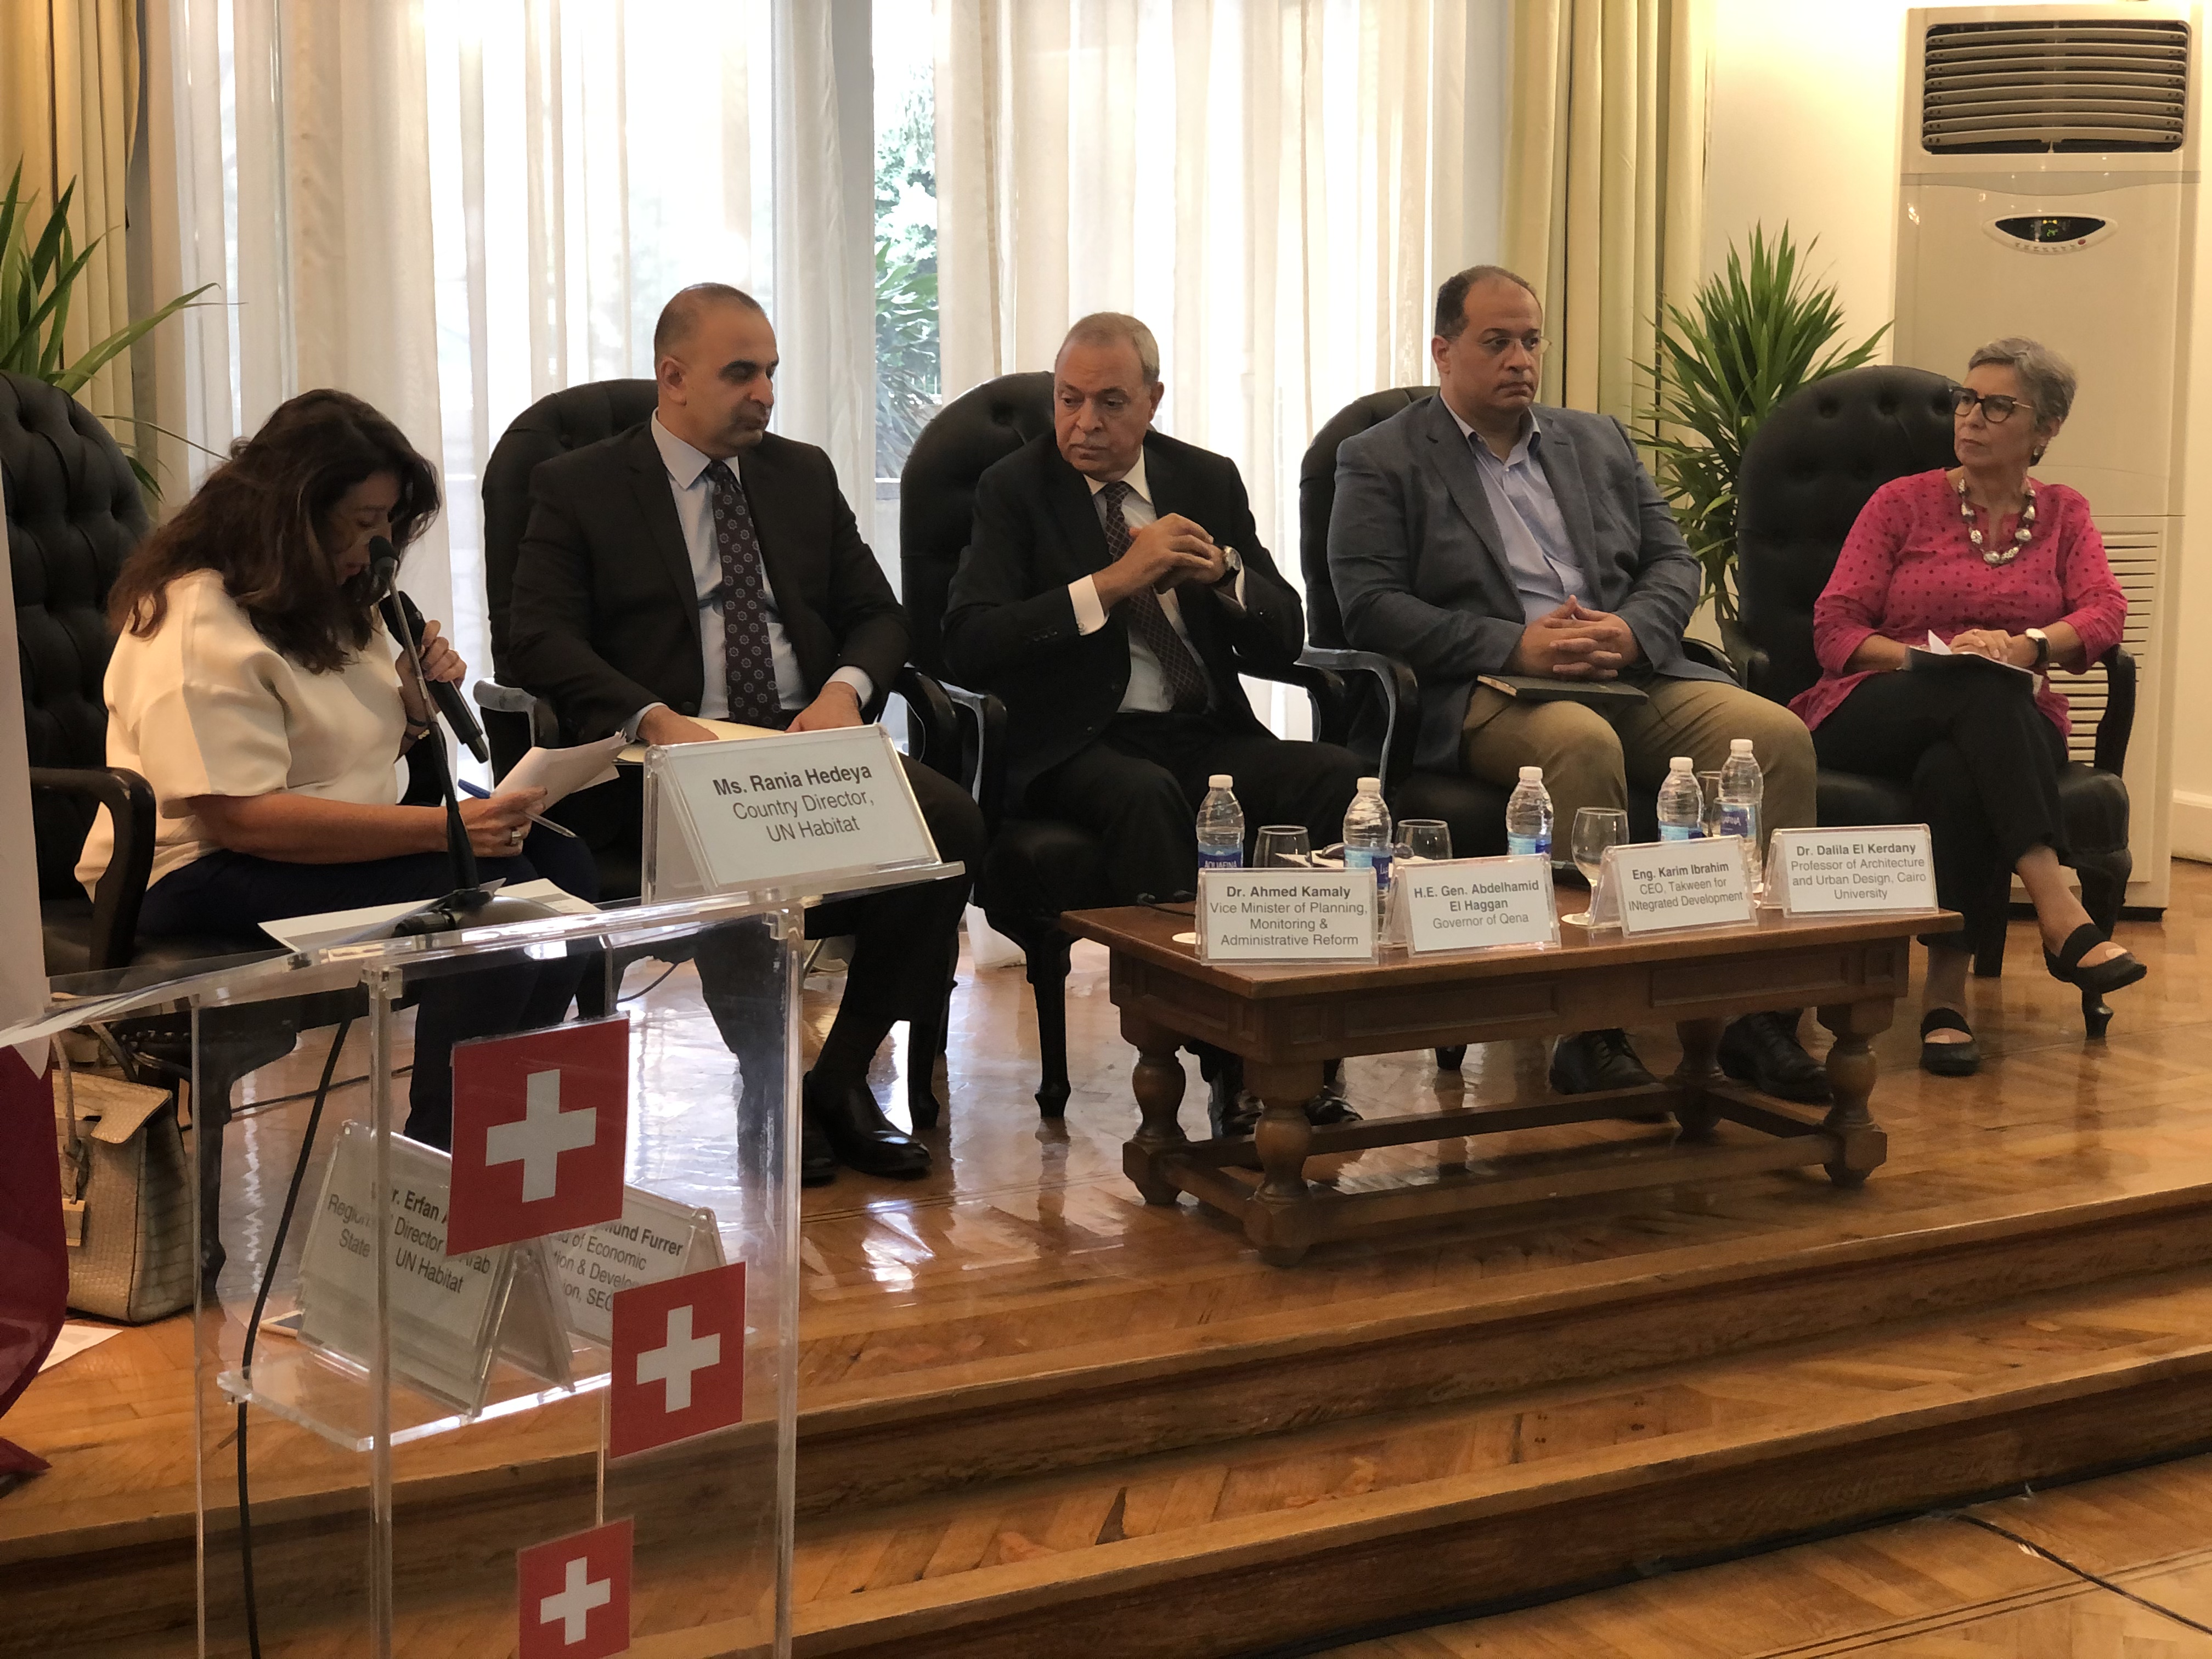 A joint high-level panel discussion on improved urban equality in Egypt